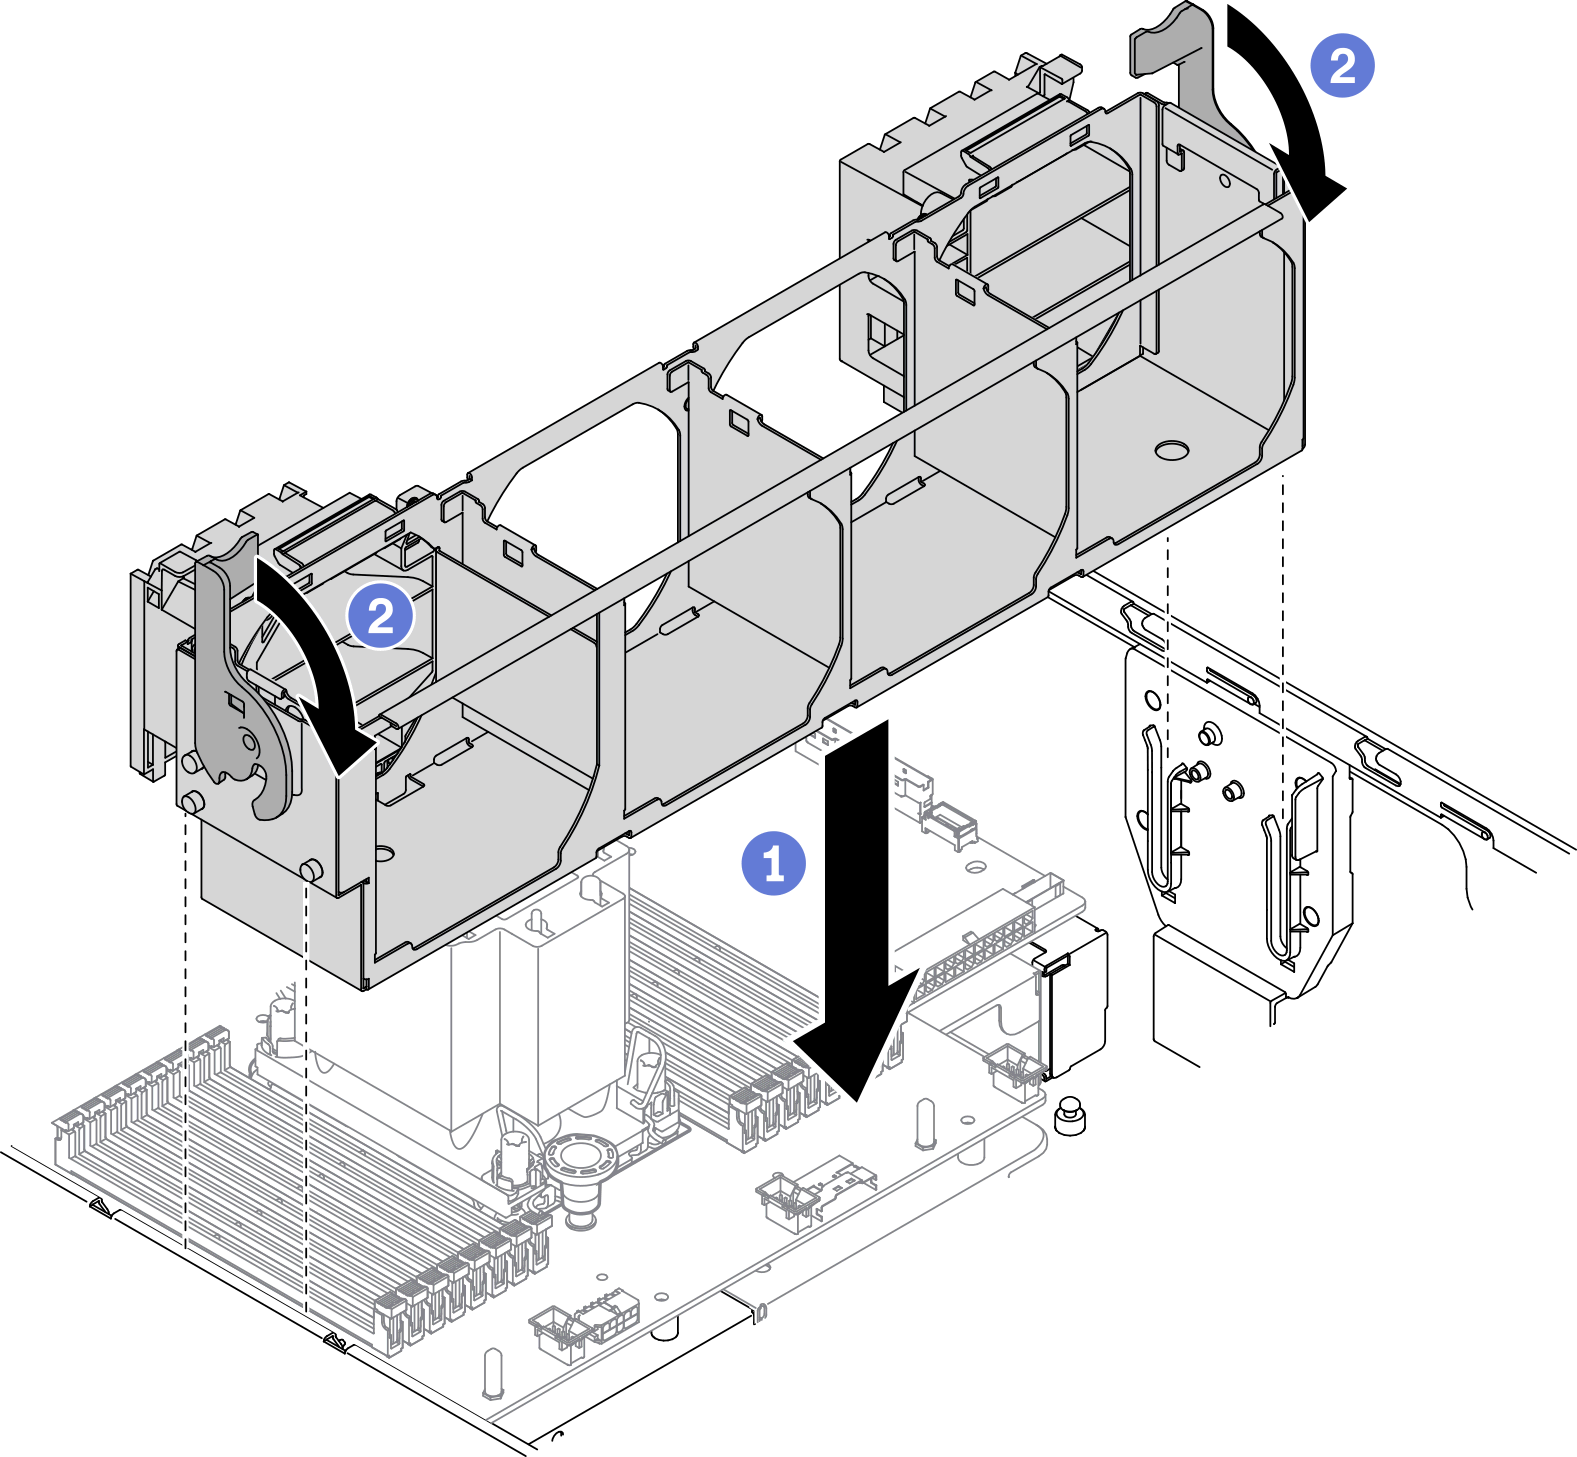 Fan cage assembly installation